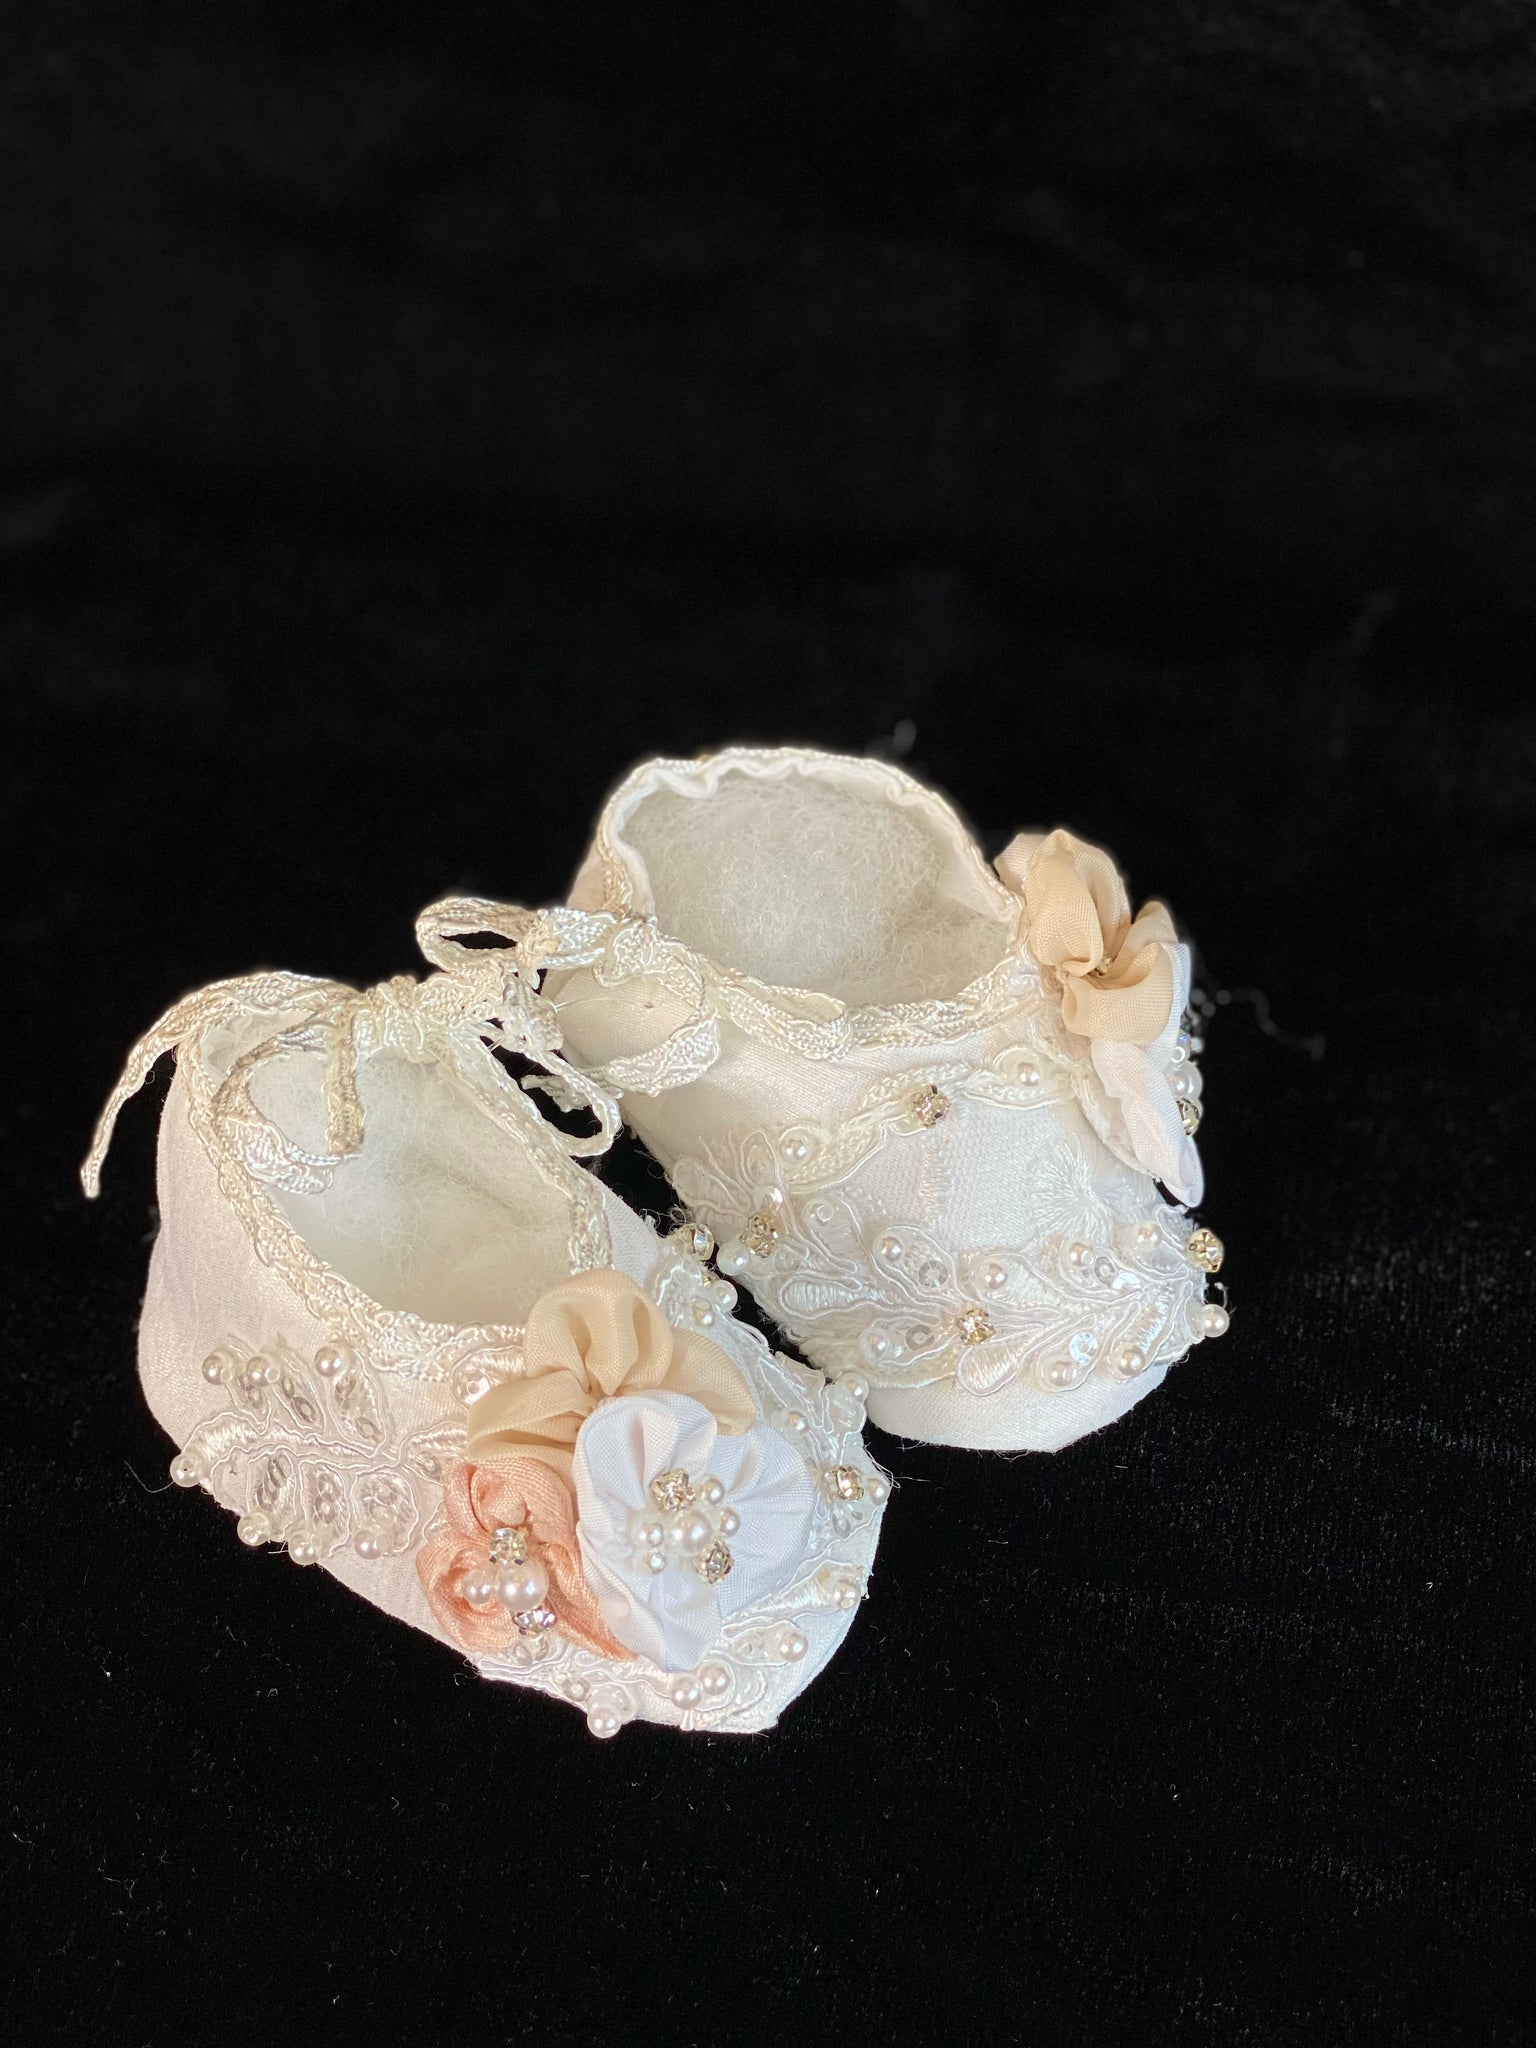 Elegant handmade ivory/white baby girl ankle boots with embroidery, lace, flowers, and jewels (pearls and crystals) with side string closure.